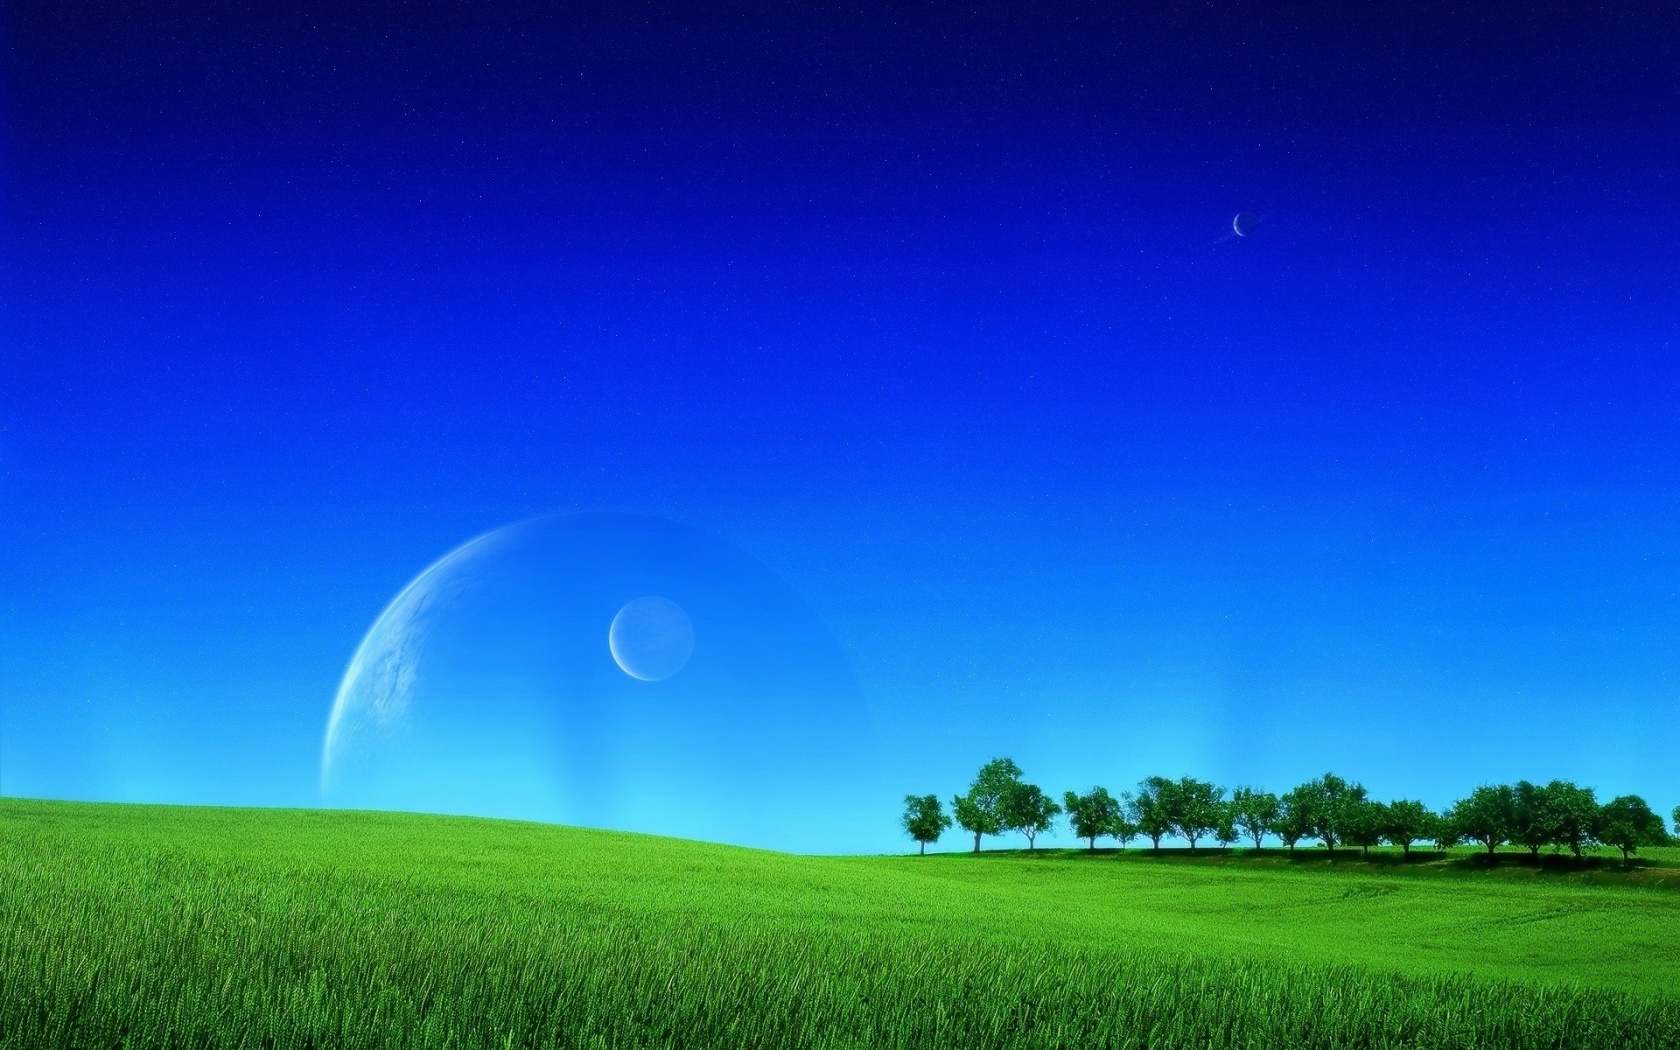 Grass Greens Field Lawn Sky Planets Space